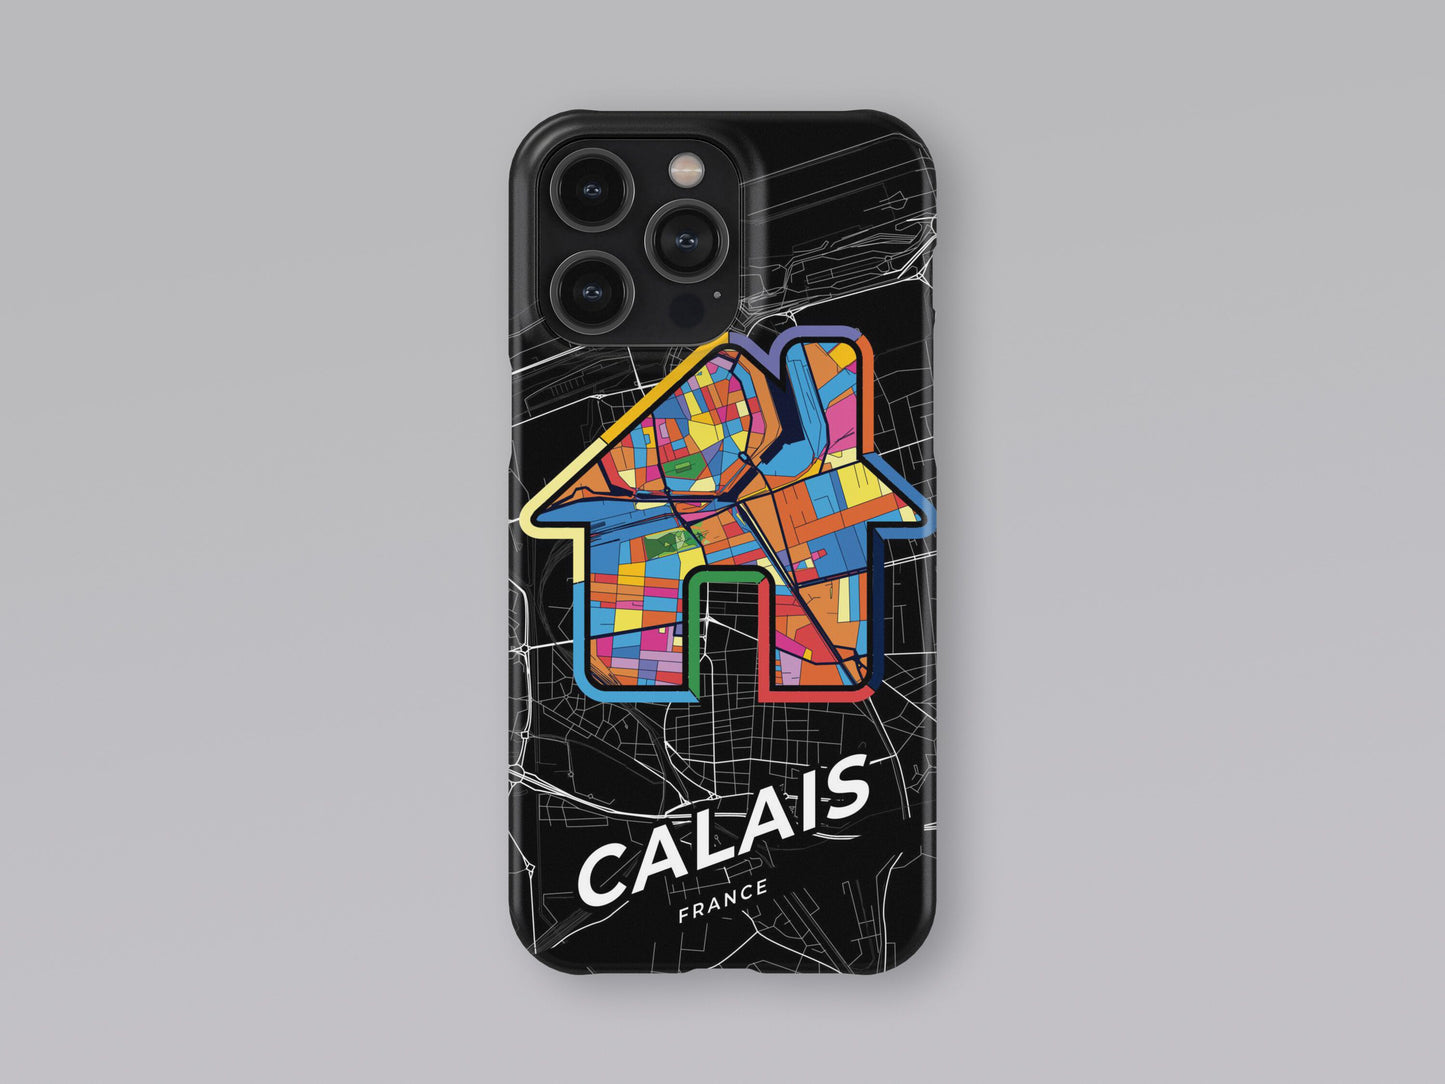 Calais France slim phone case with colorful icon. Birthday, wedding or housewarming gift. Couple match cases. 3